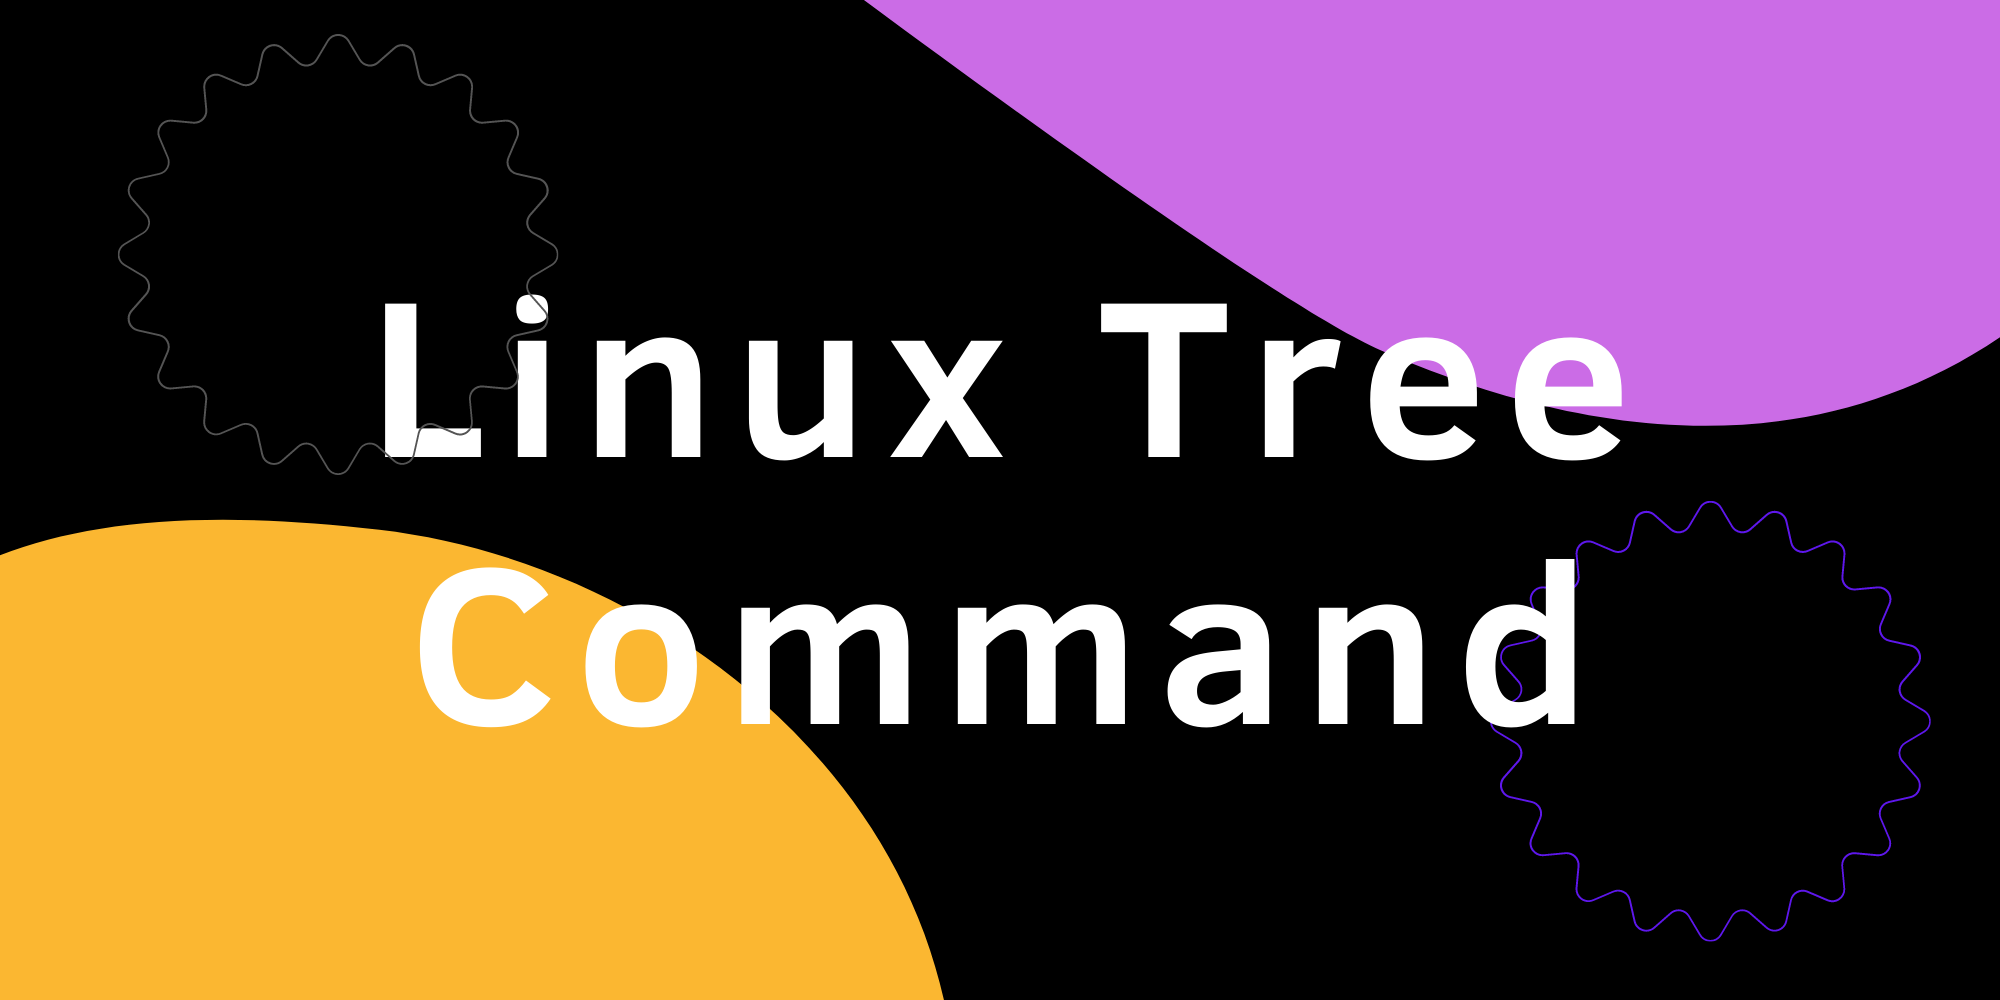 What is the Linux tree command, and how is it used?